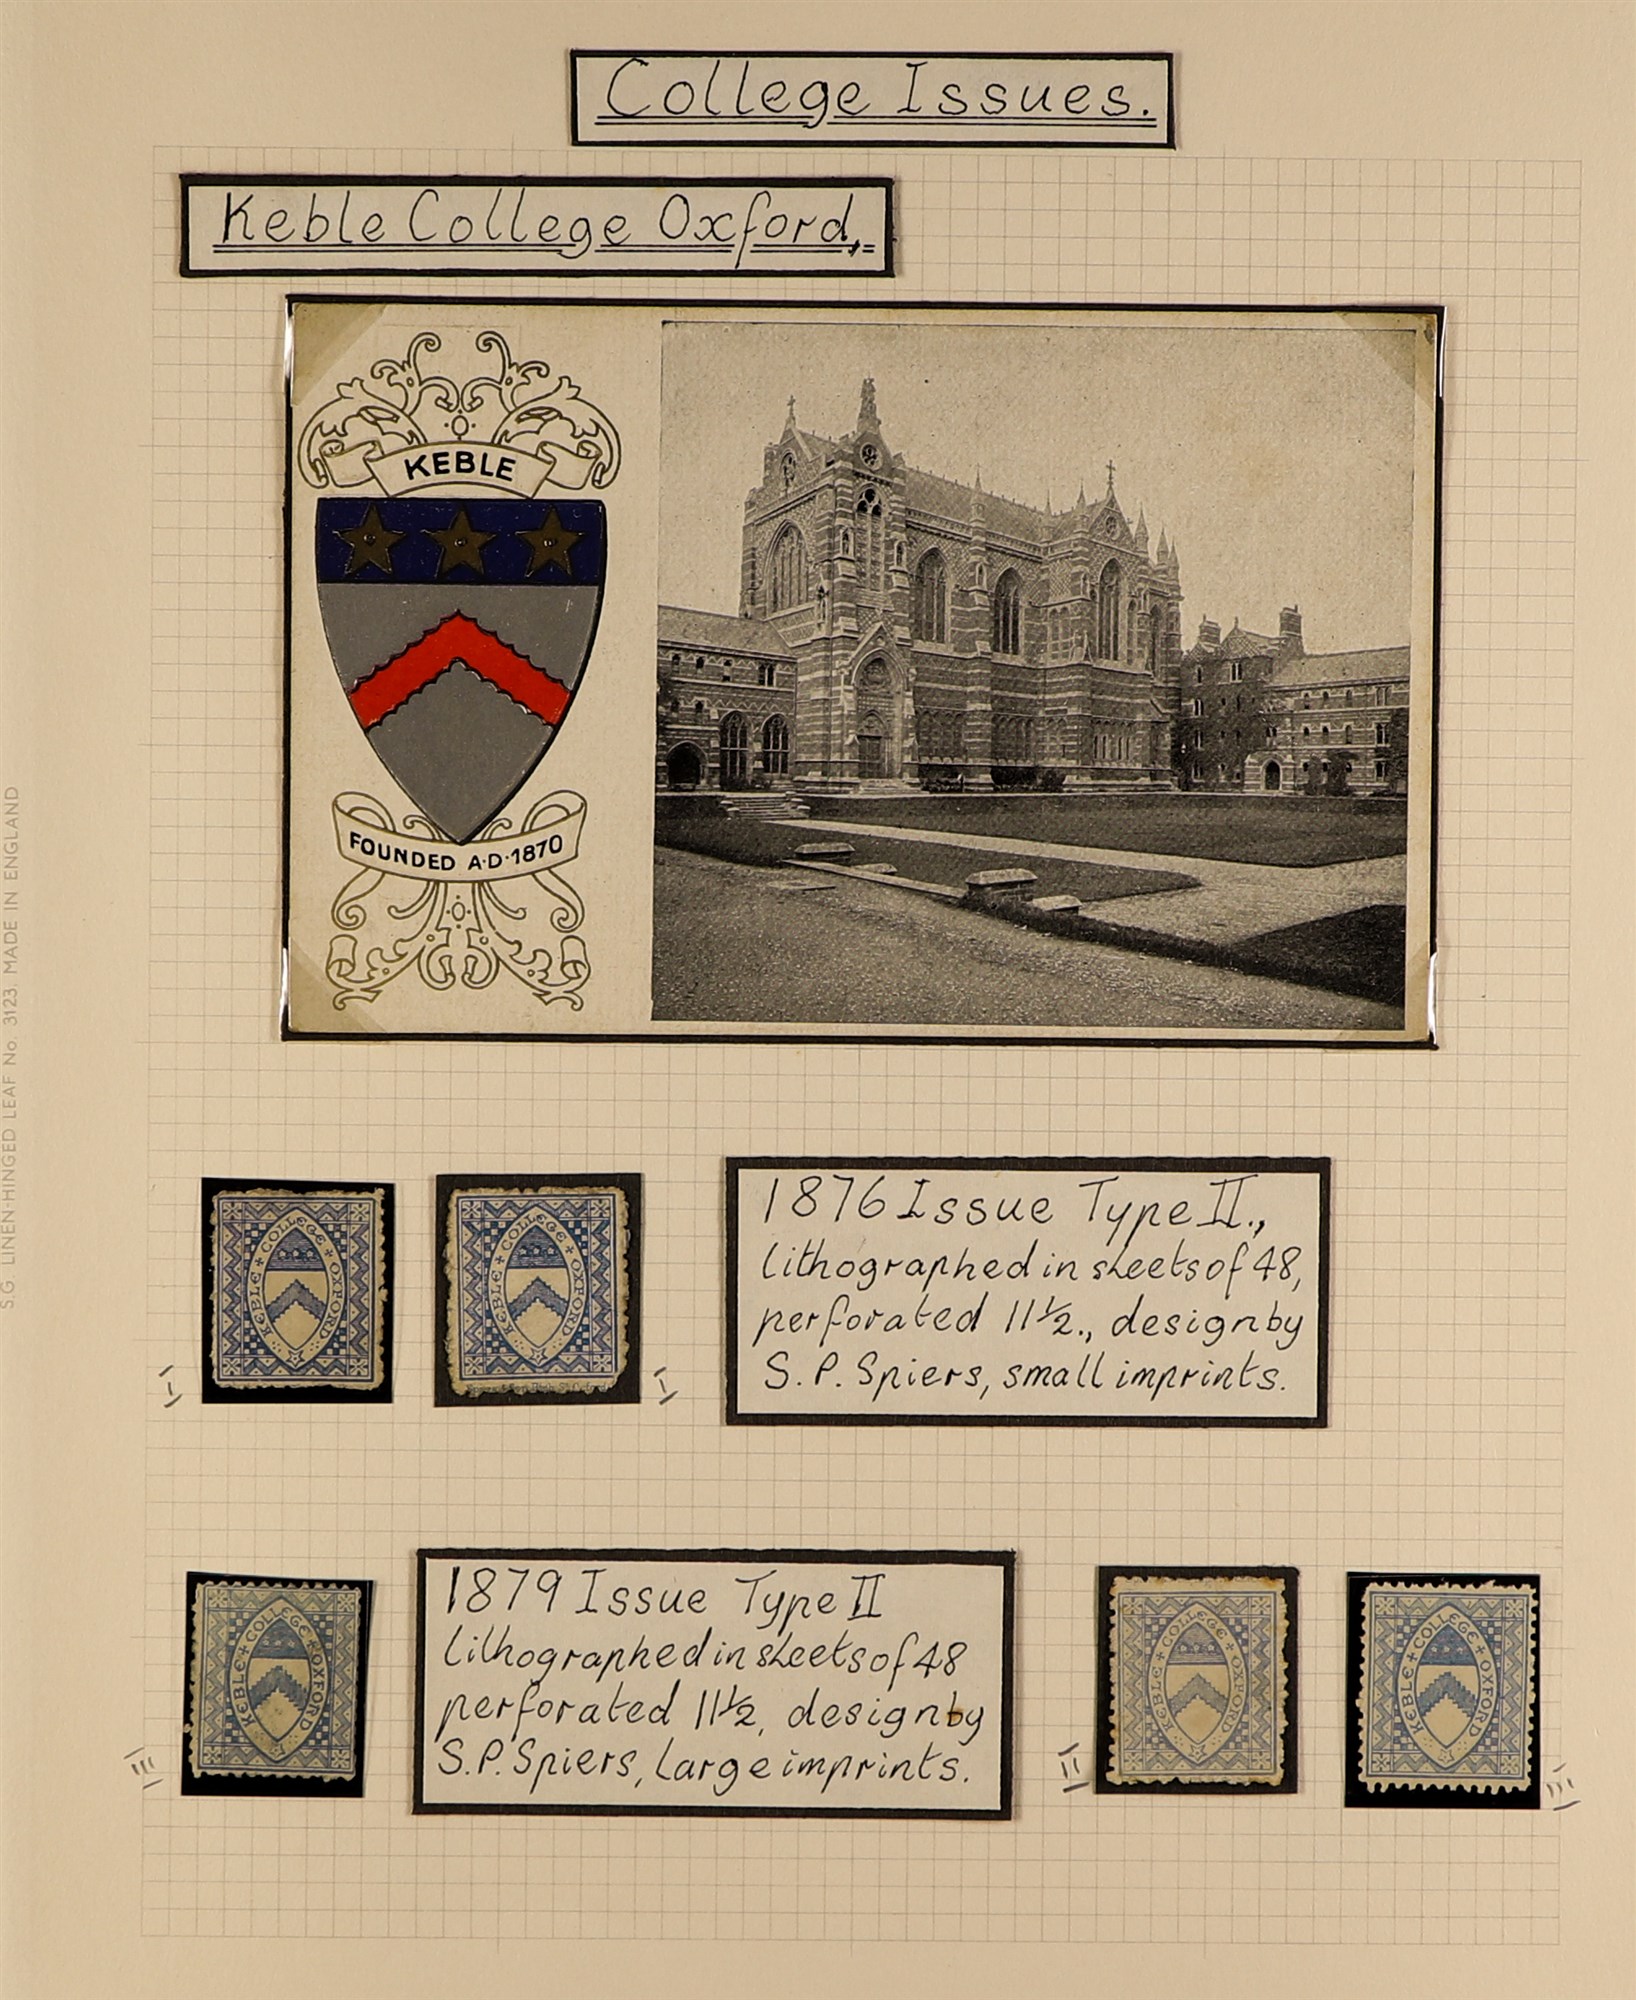 GREAT BRITAIN COLLEGE STAMPS - KEBLE COLLEGE OXFORD specialised collection of 100+ stamps spanning